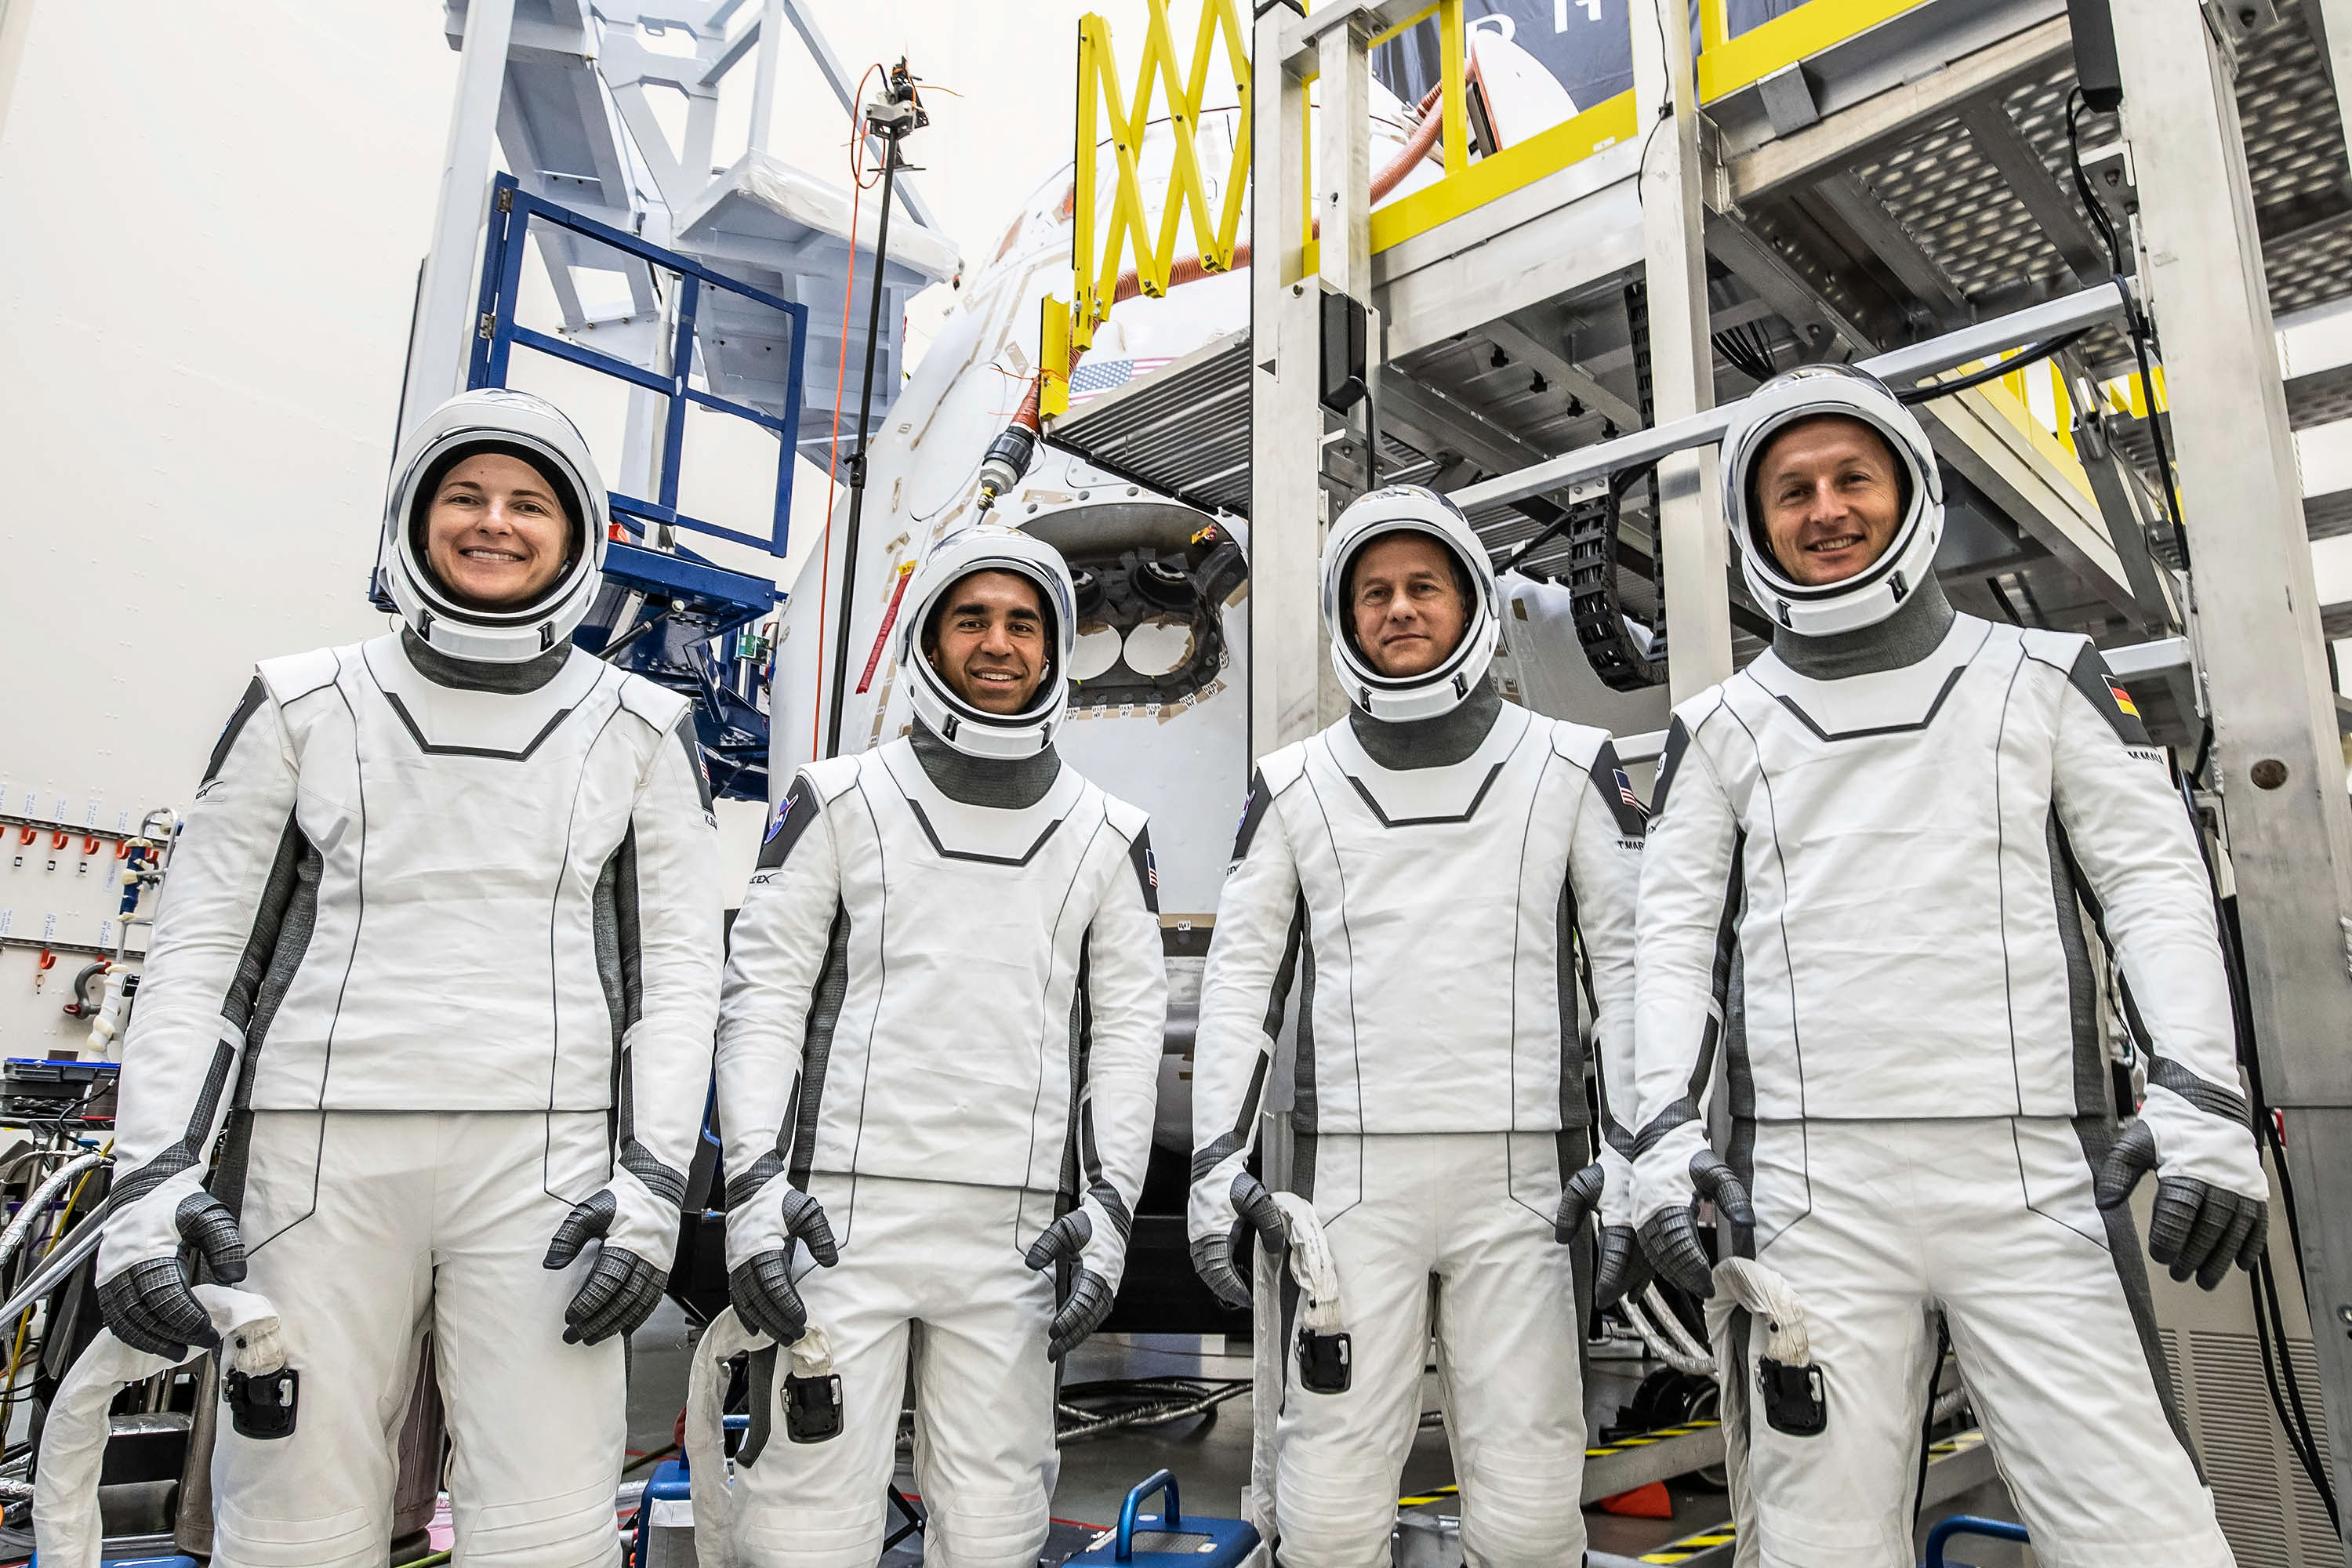 The astronauts of NASA’s SpaceX Crew-3 mission pose for a portrait in their spacesuits during a training session. From left are: NASA astronauts Kayla Barron, Raja Chari, and Thomas Marshburn, and ESA (European Space Agency) astronaut Matthias Maurer.